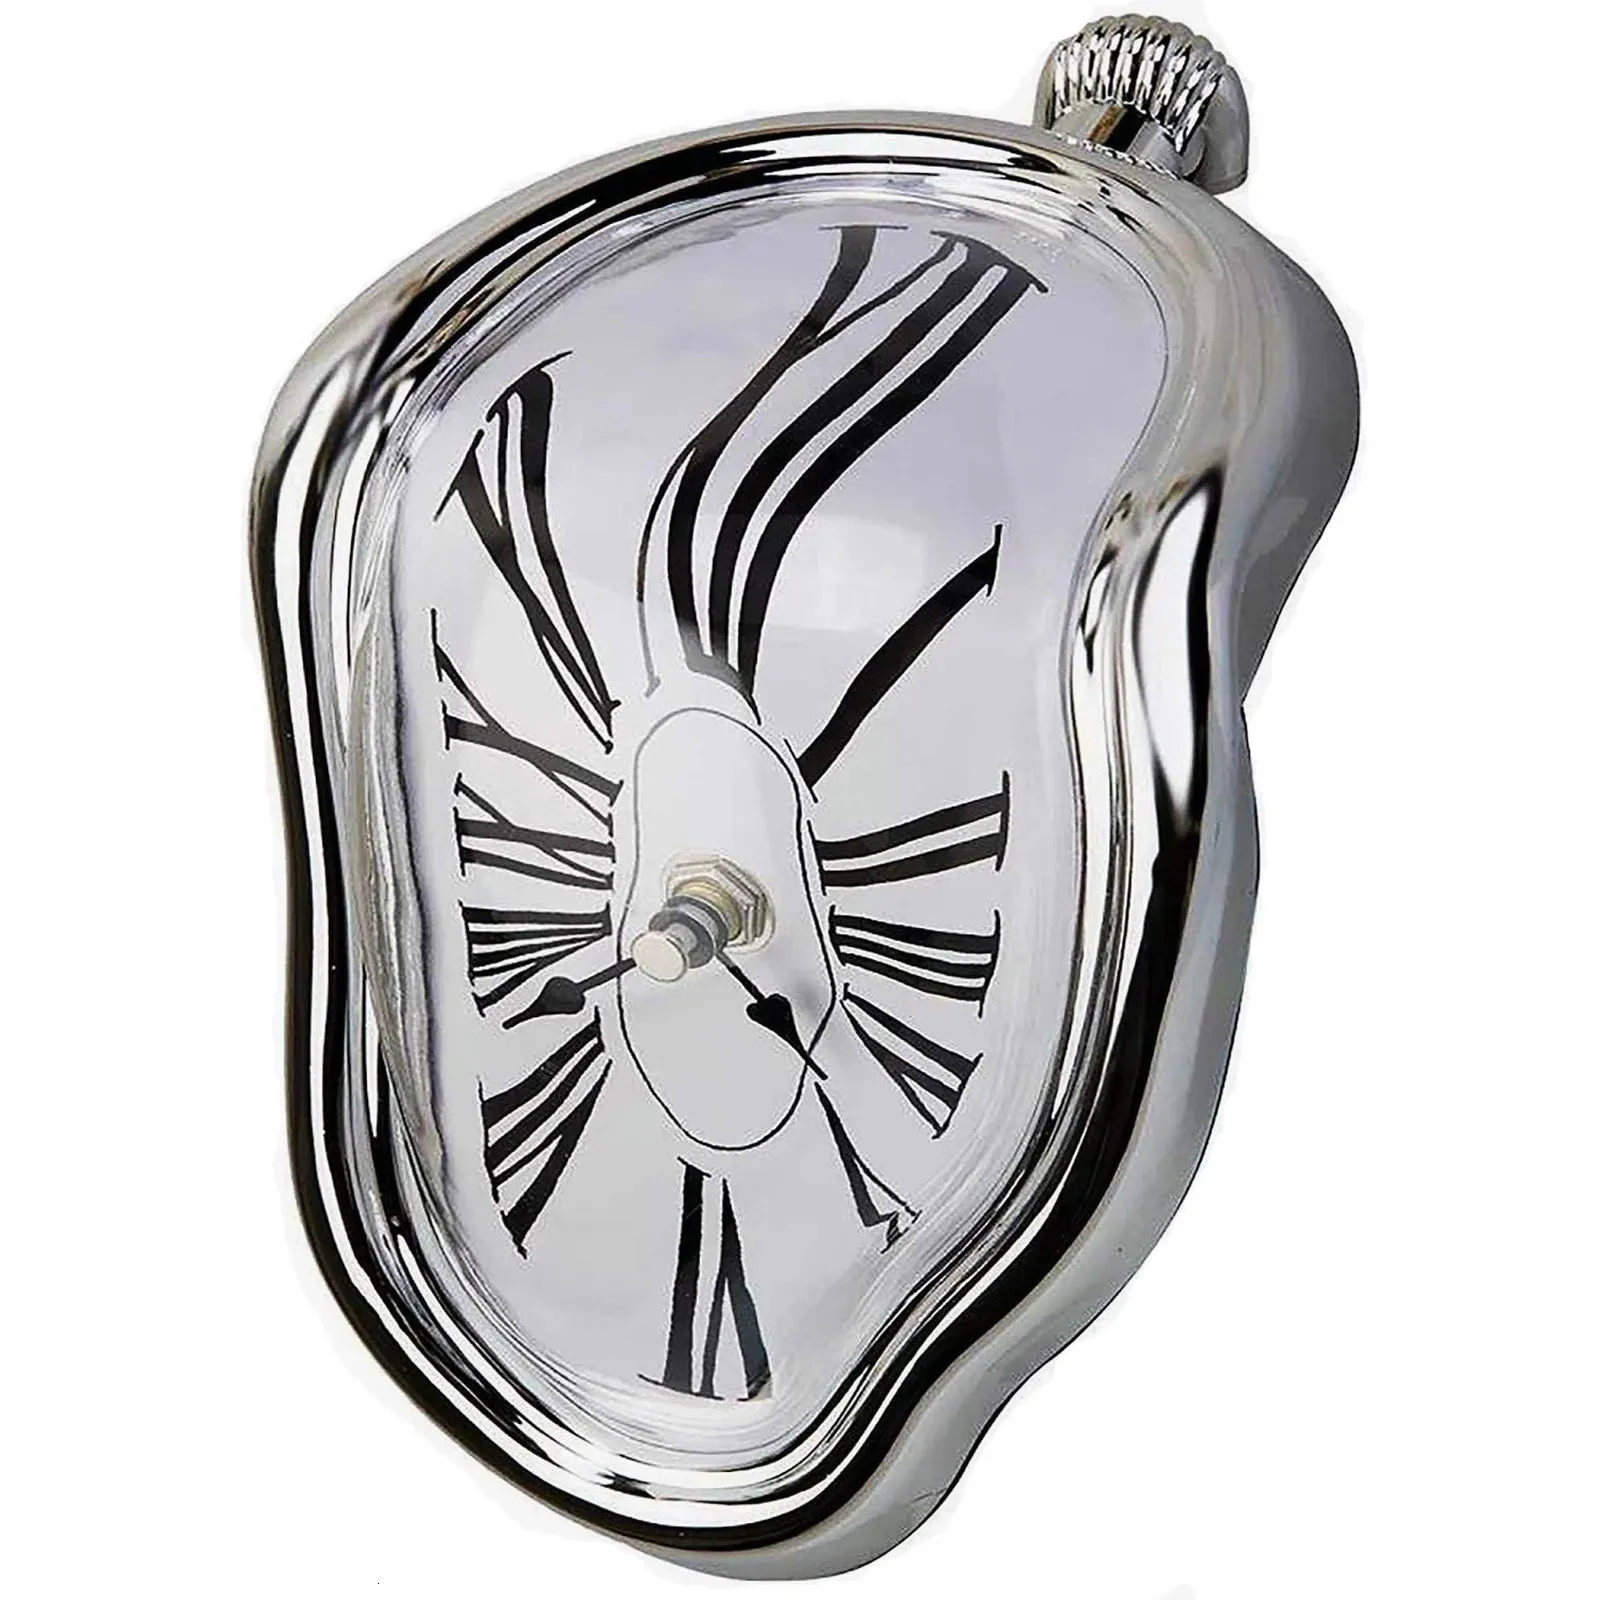 Silver Melting Clock Used for Decorating Home Office Shelves and Desktop Interesting Creative Gifts Watch Melting Clock 240105